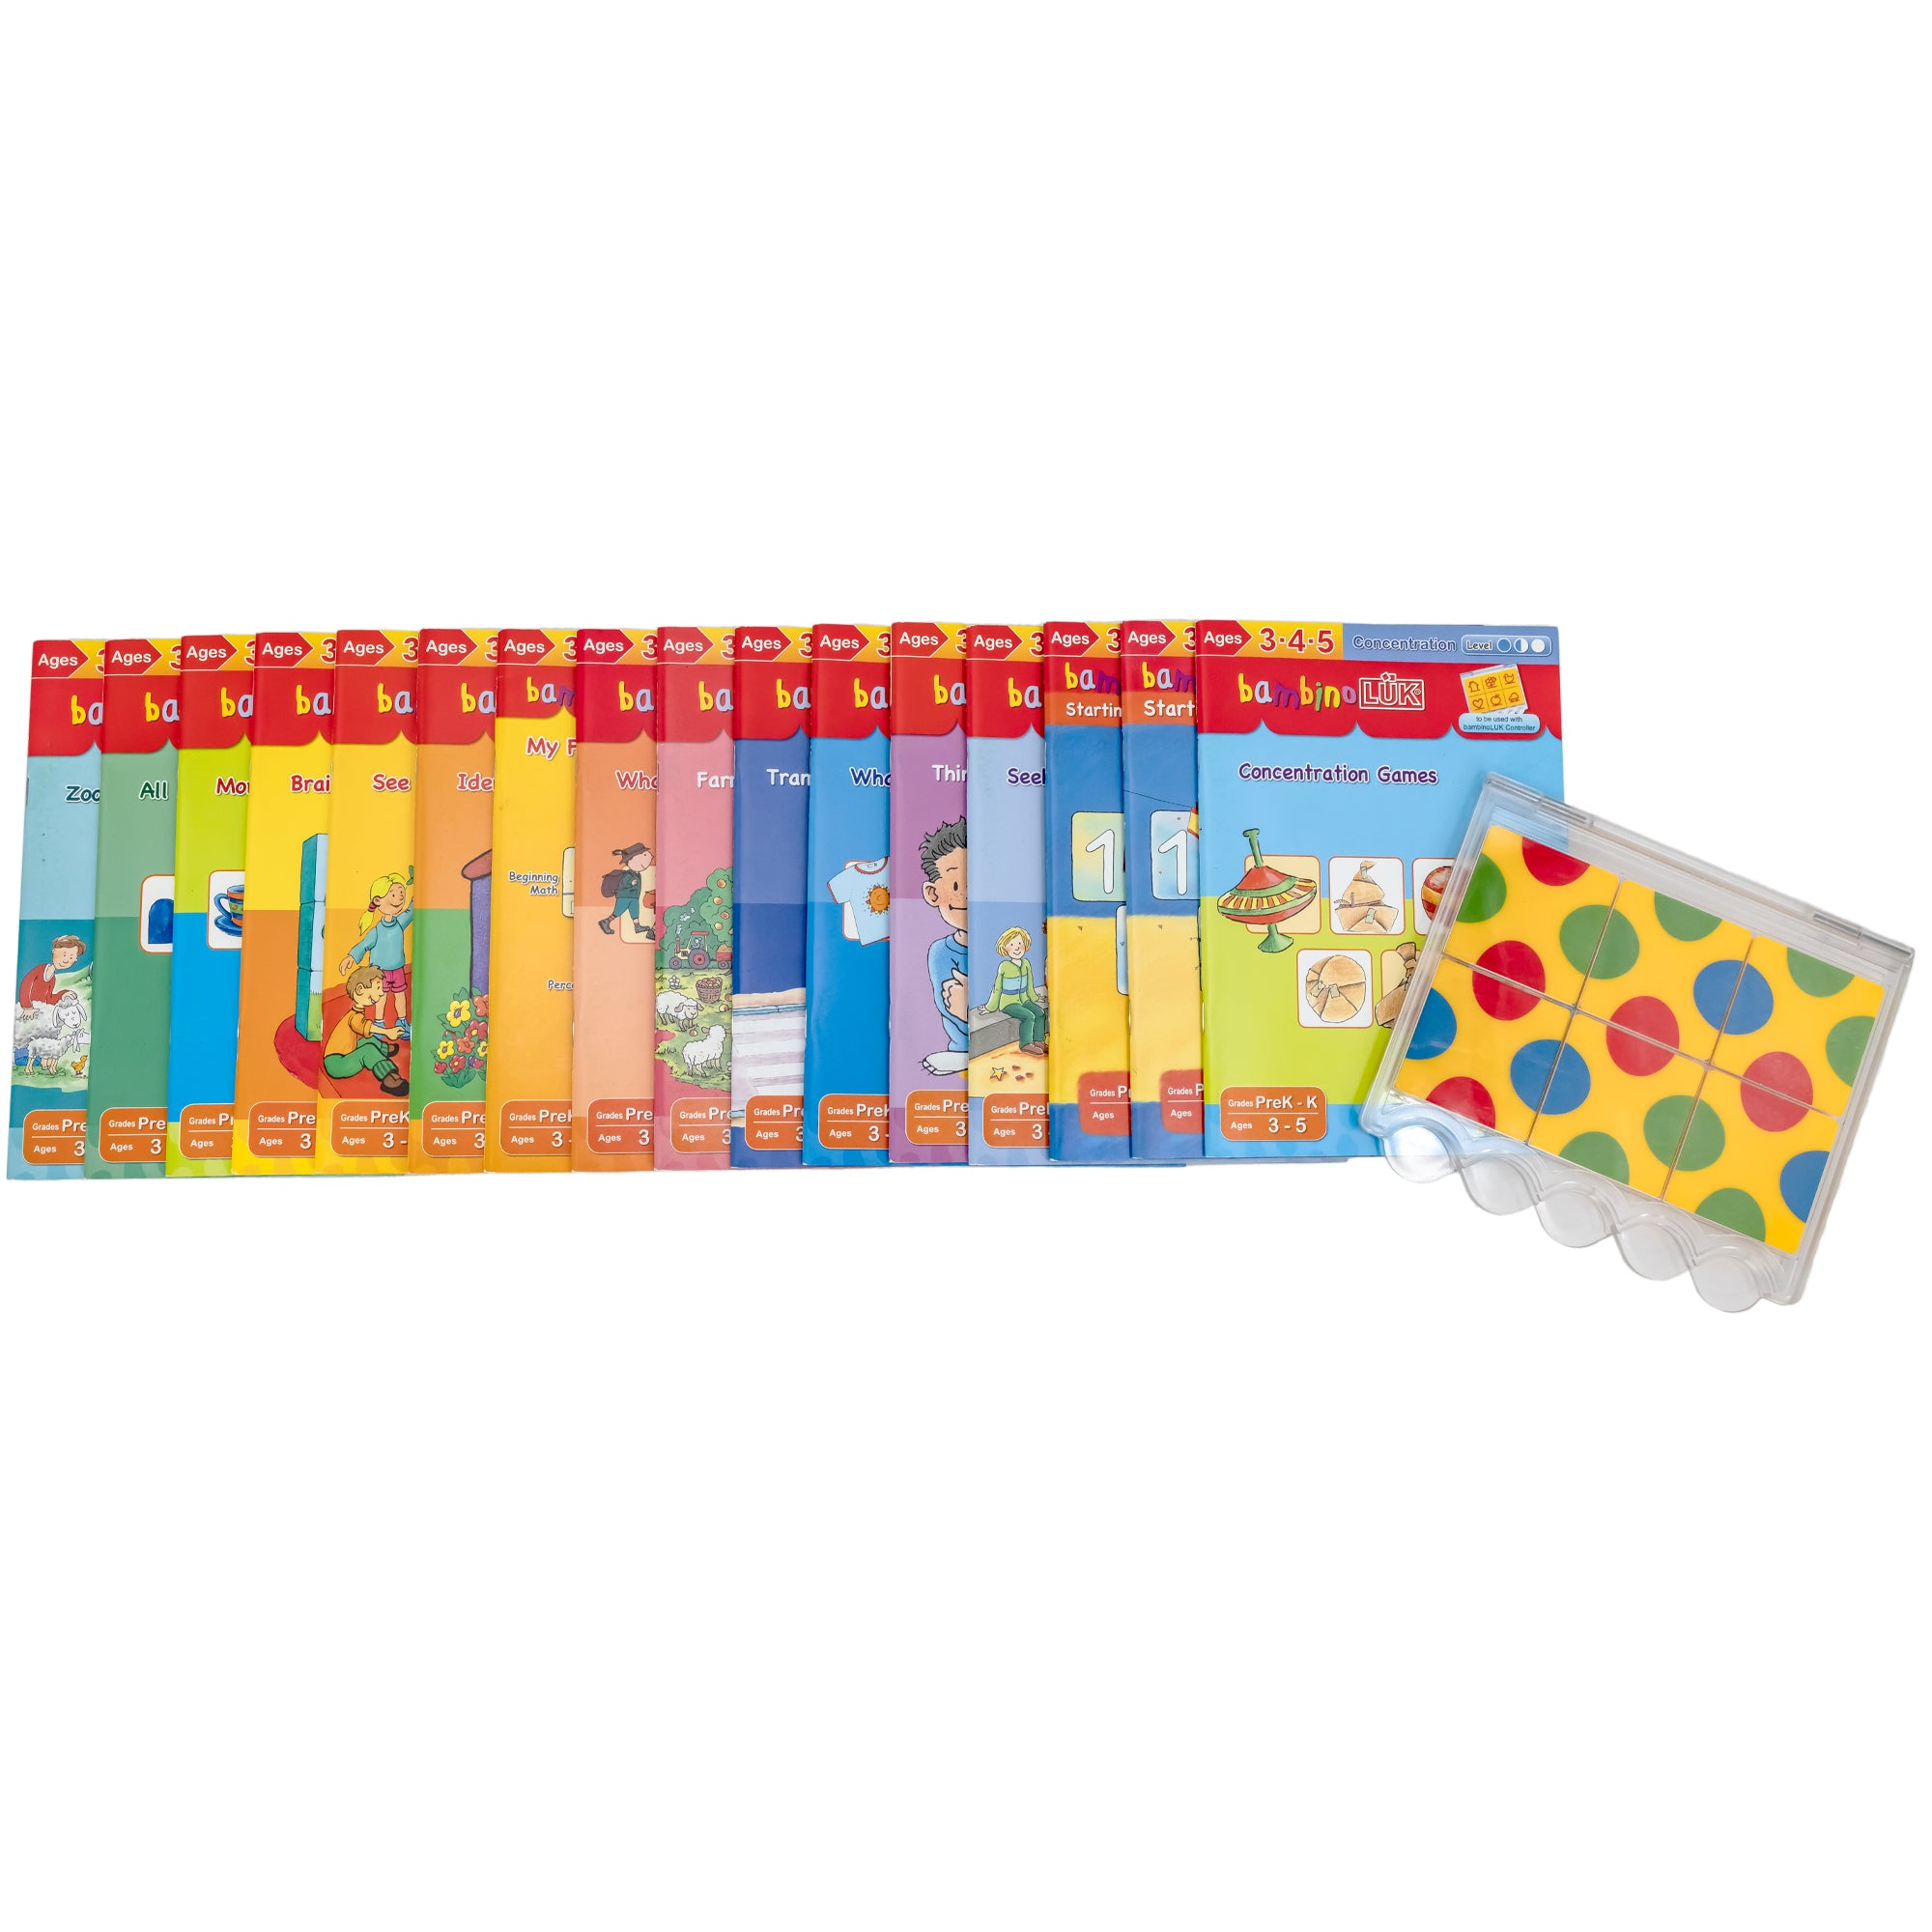 16 Bambino L U K books spread out to show partial covers. Each cover is a different color with illustrations on each. The top visible cover shows squares with images in them of a metal top, a paper-wrapped boat, a paper-wrapped ball, and a paper-wrapped metal top. Over the top of thsis cover is the Bambino LUK controller. It is a clear, hinged, flat plastic with tiles inside. The 6 tiles, 3 on top and 3 on bottom, are yellow with blue, green, and red dots.